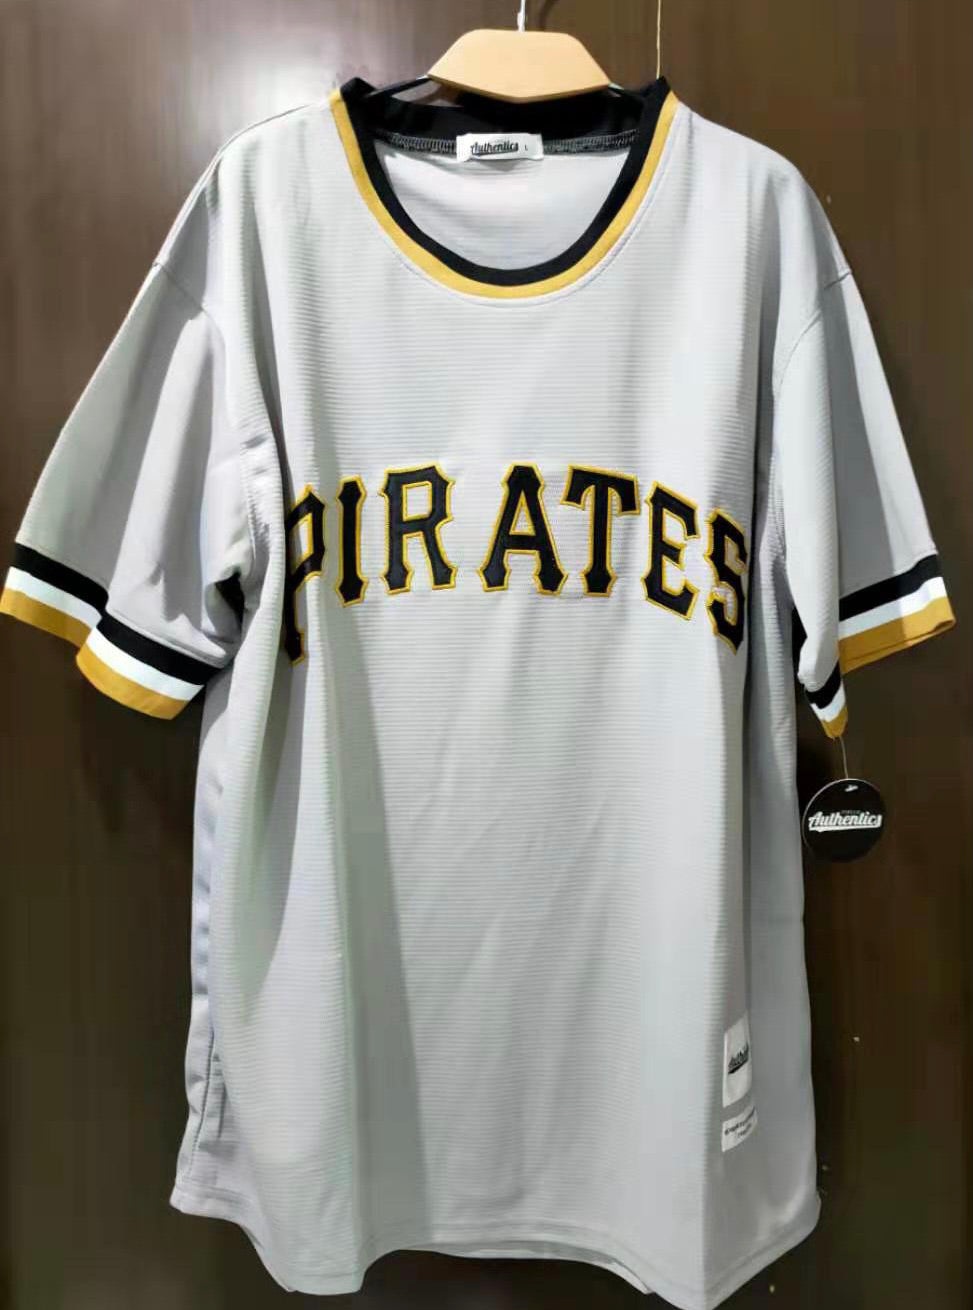 roberto clemente jersey youth